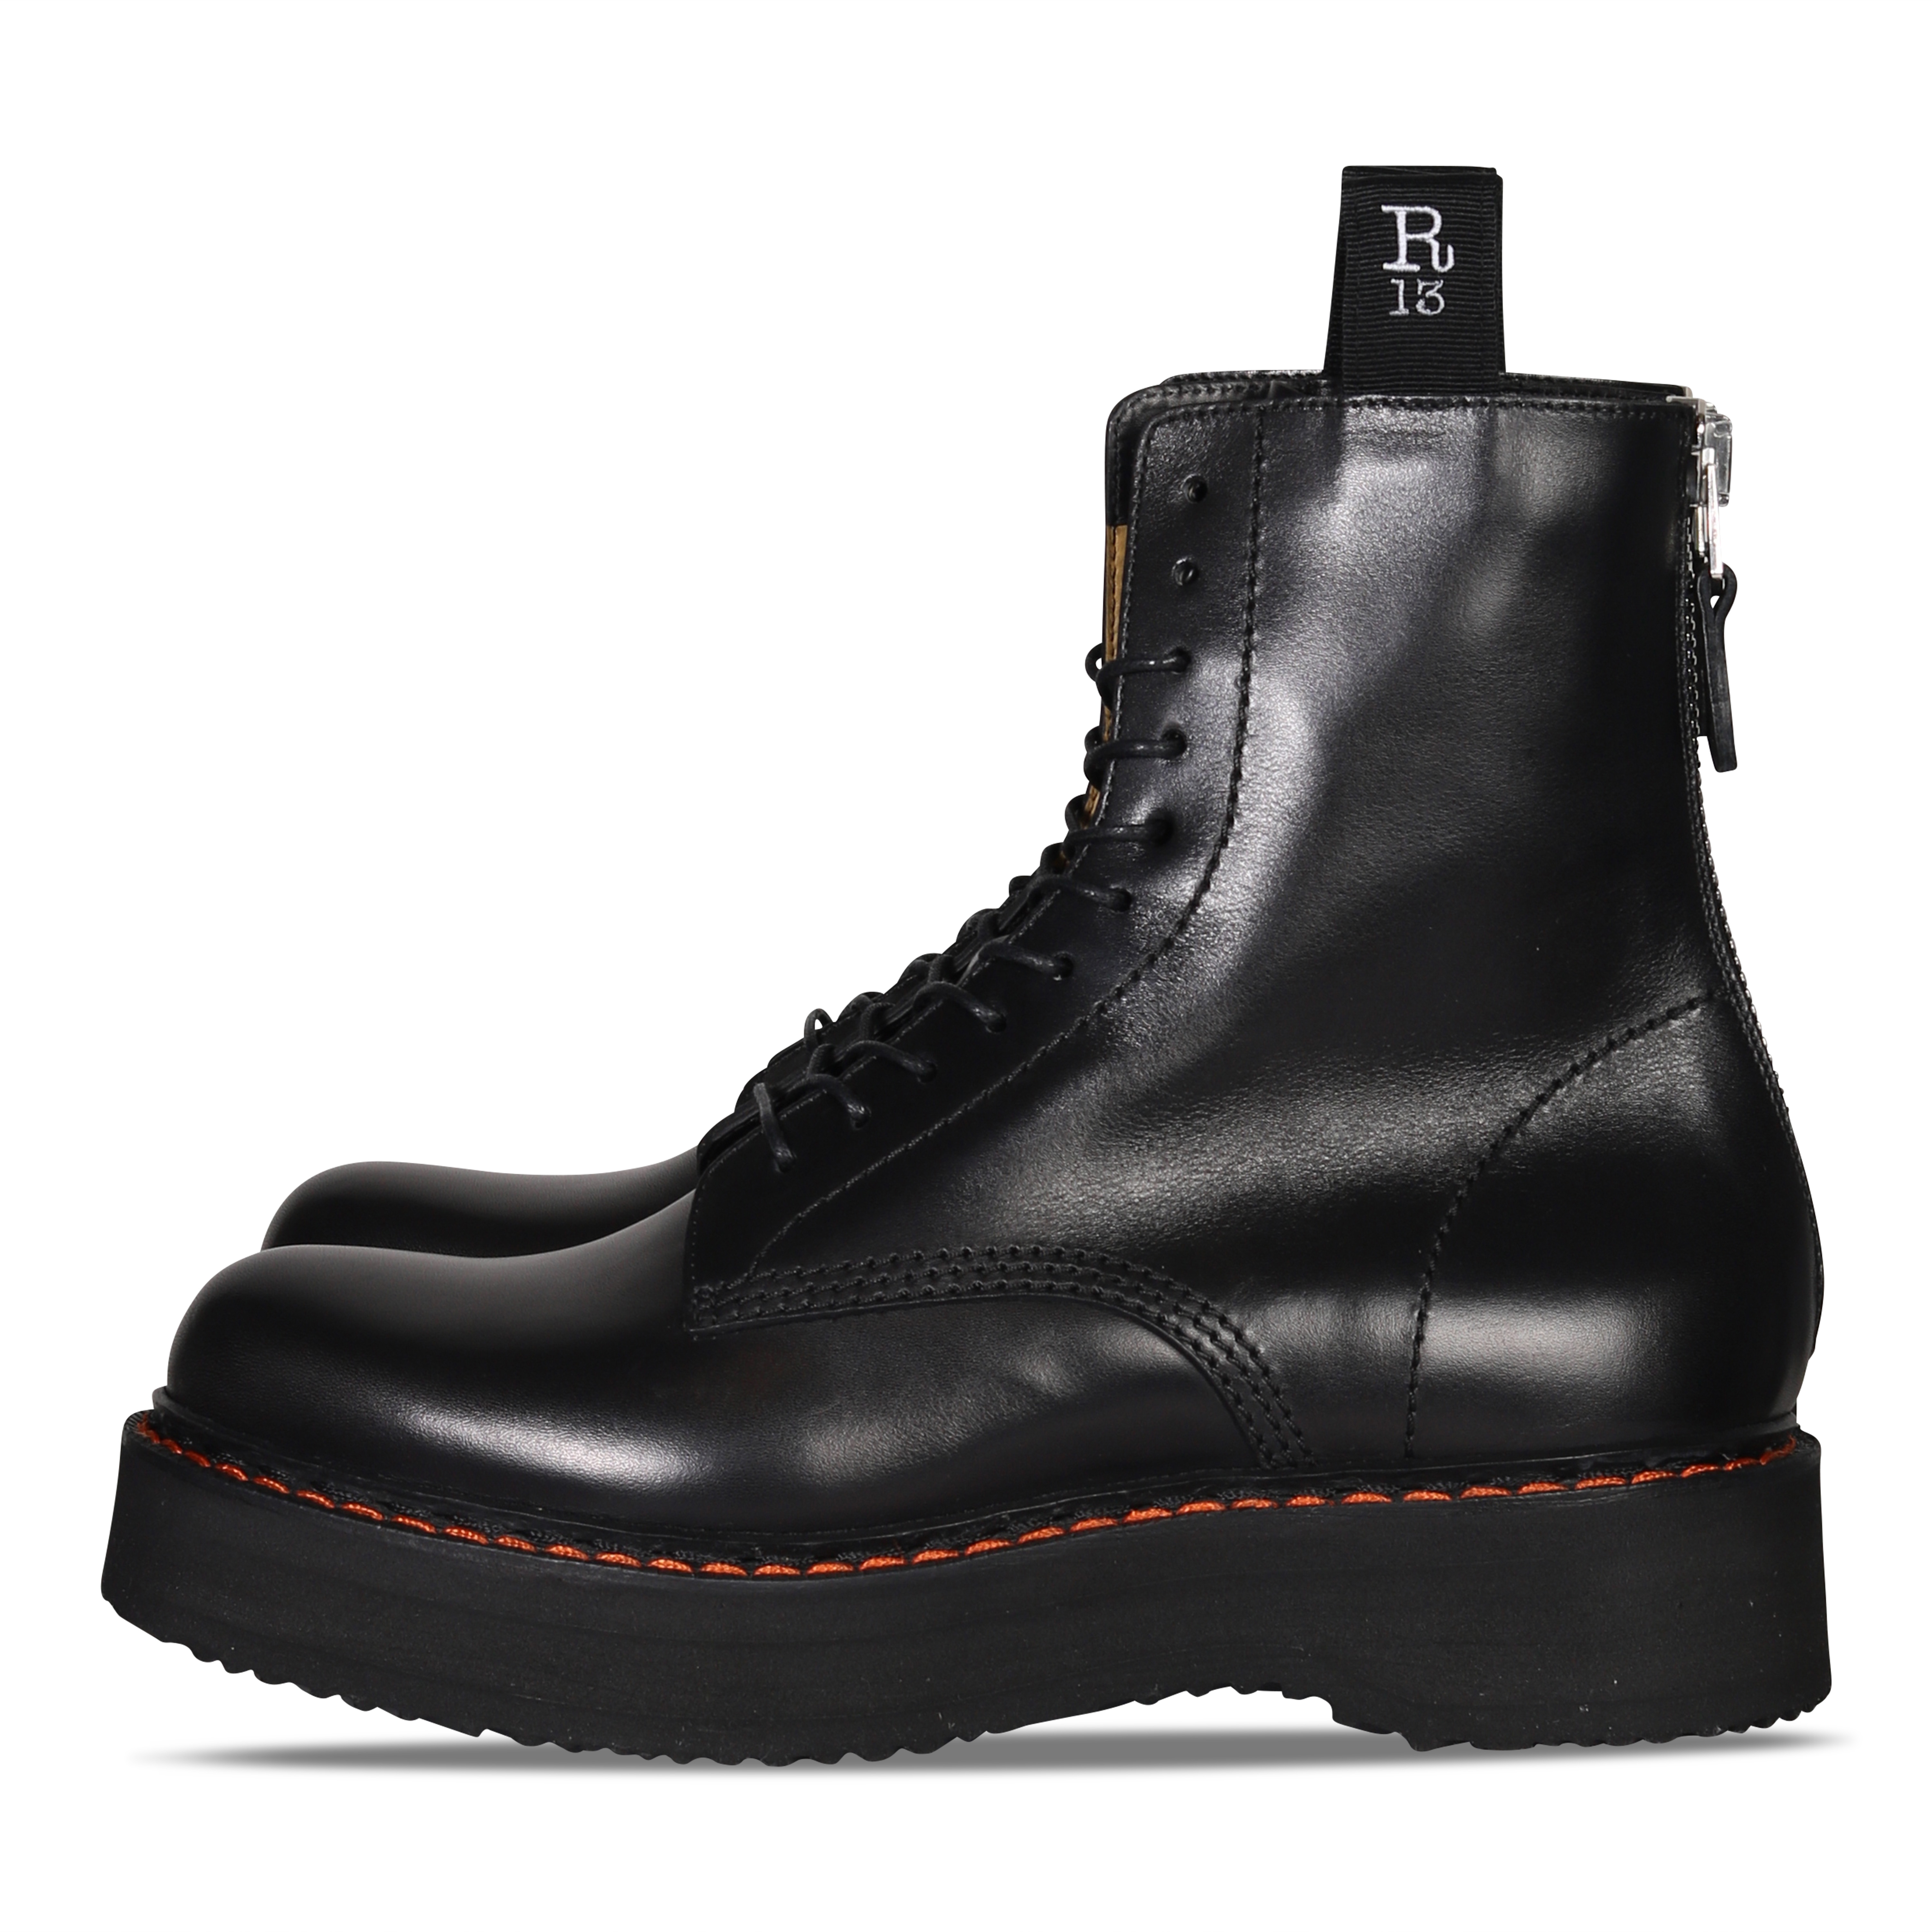 R13 Stack Boots in Black 43